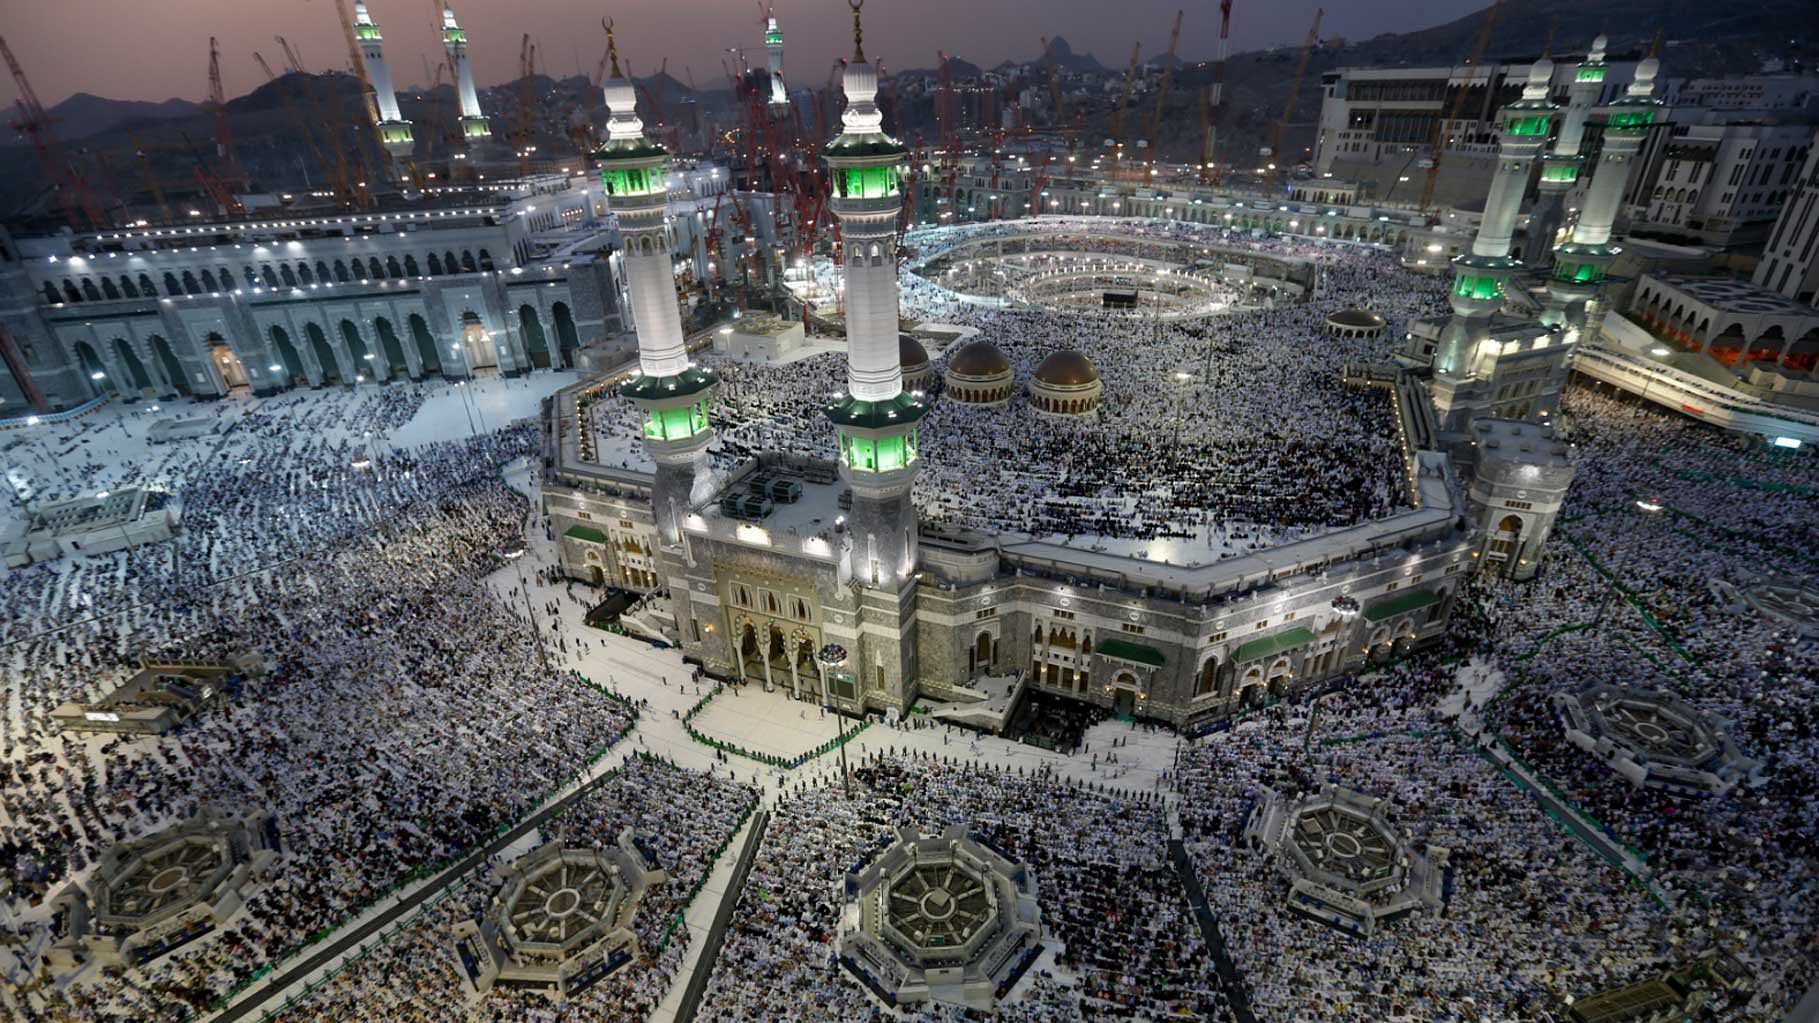 Muslim pilgrims pray around the holy Kaaba at the Grand Mosque, during the annual Haj pilgrimage in Mecca in this file photo.&nbsp;